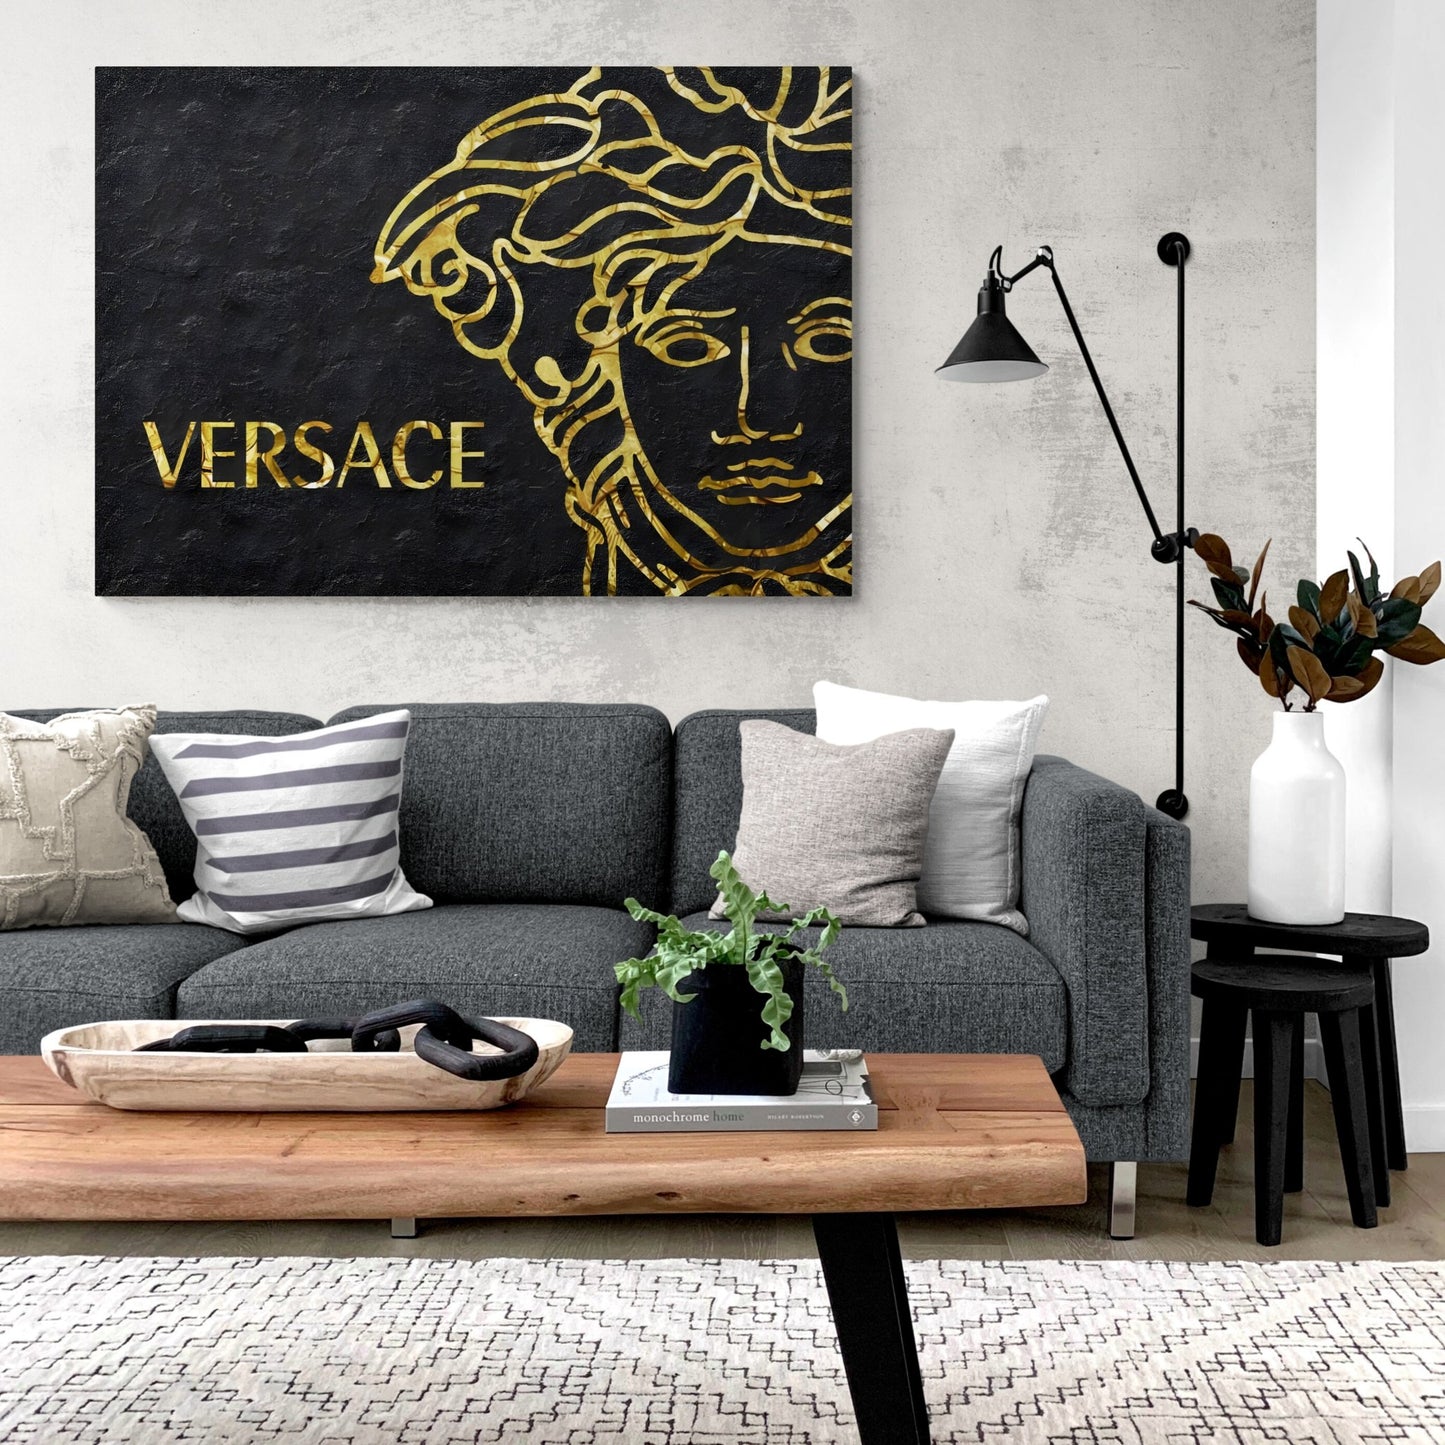 Versace Designer Brand on Vintage Background A4 Poster Print Décor Gift  Wall Art